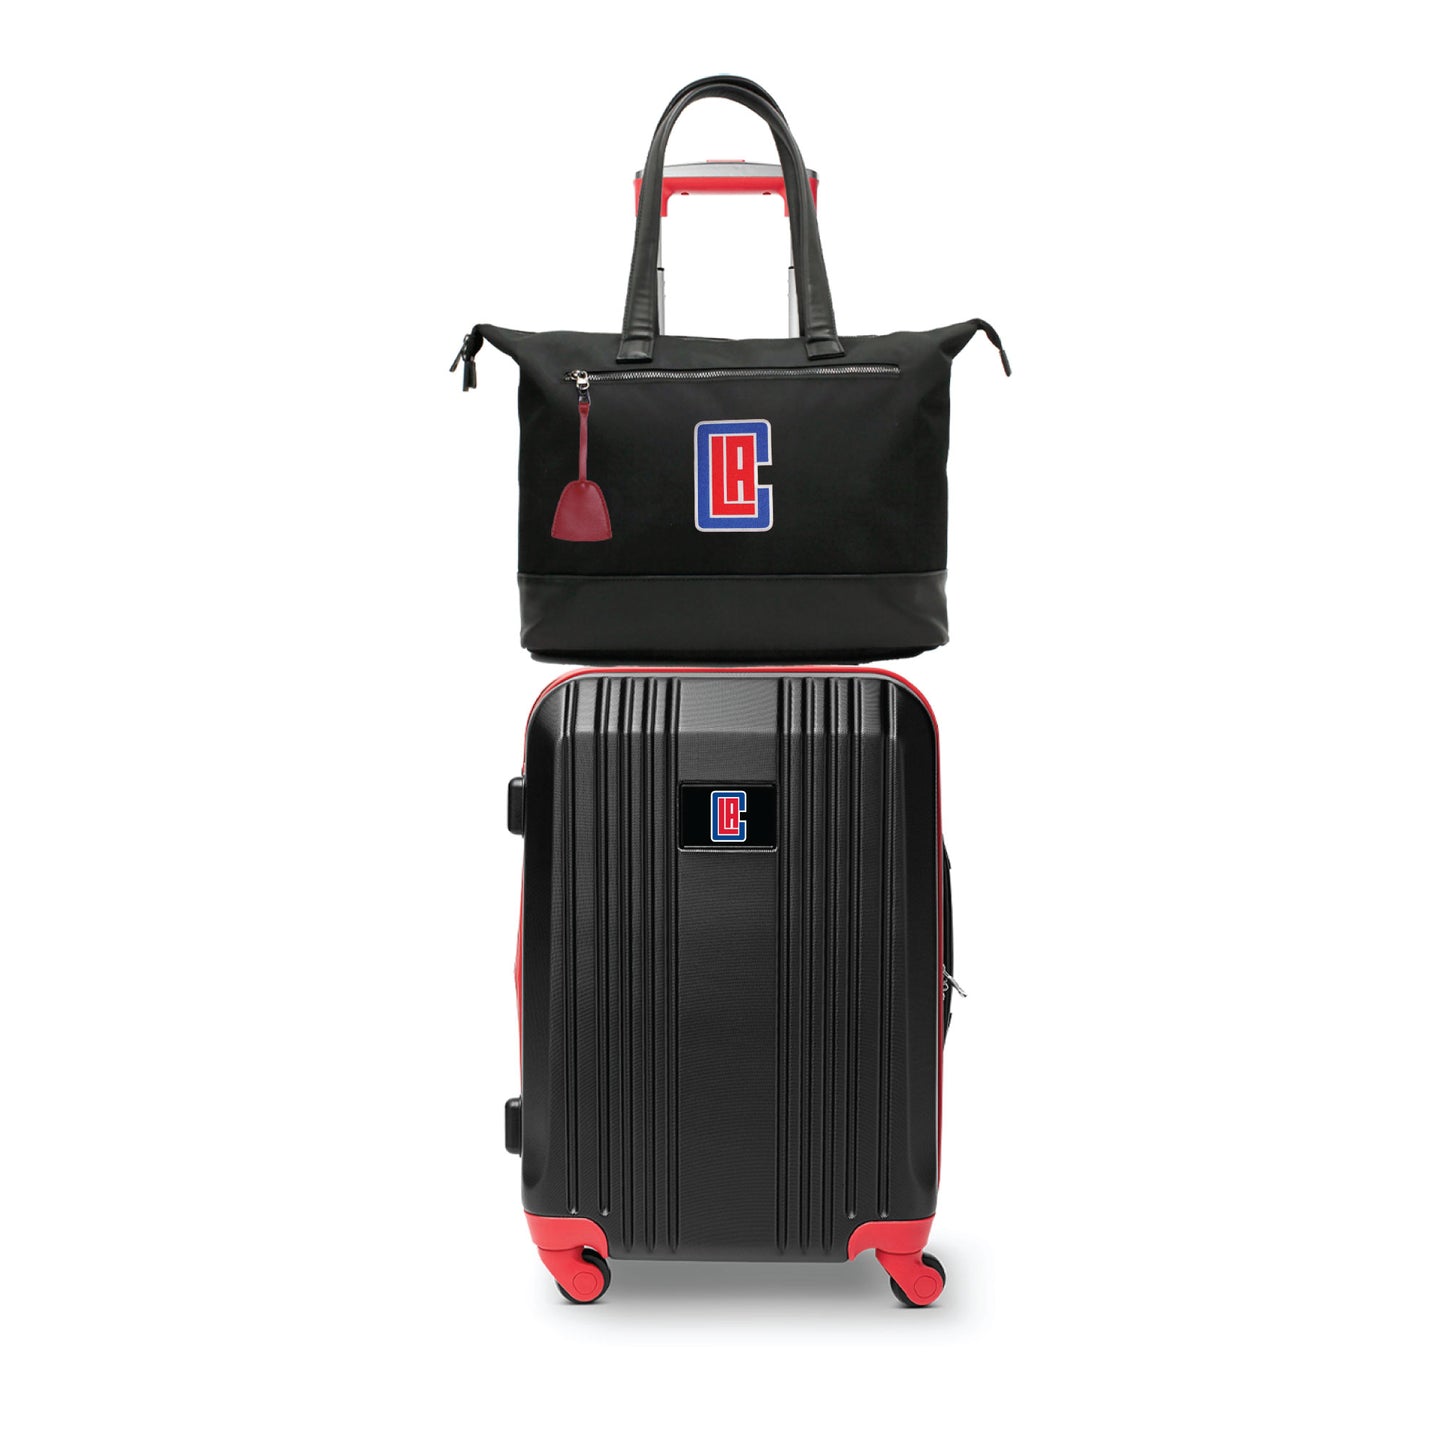 Los Angeles Clippers Premium Laptop Tote Bag and Luggage Set